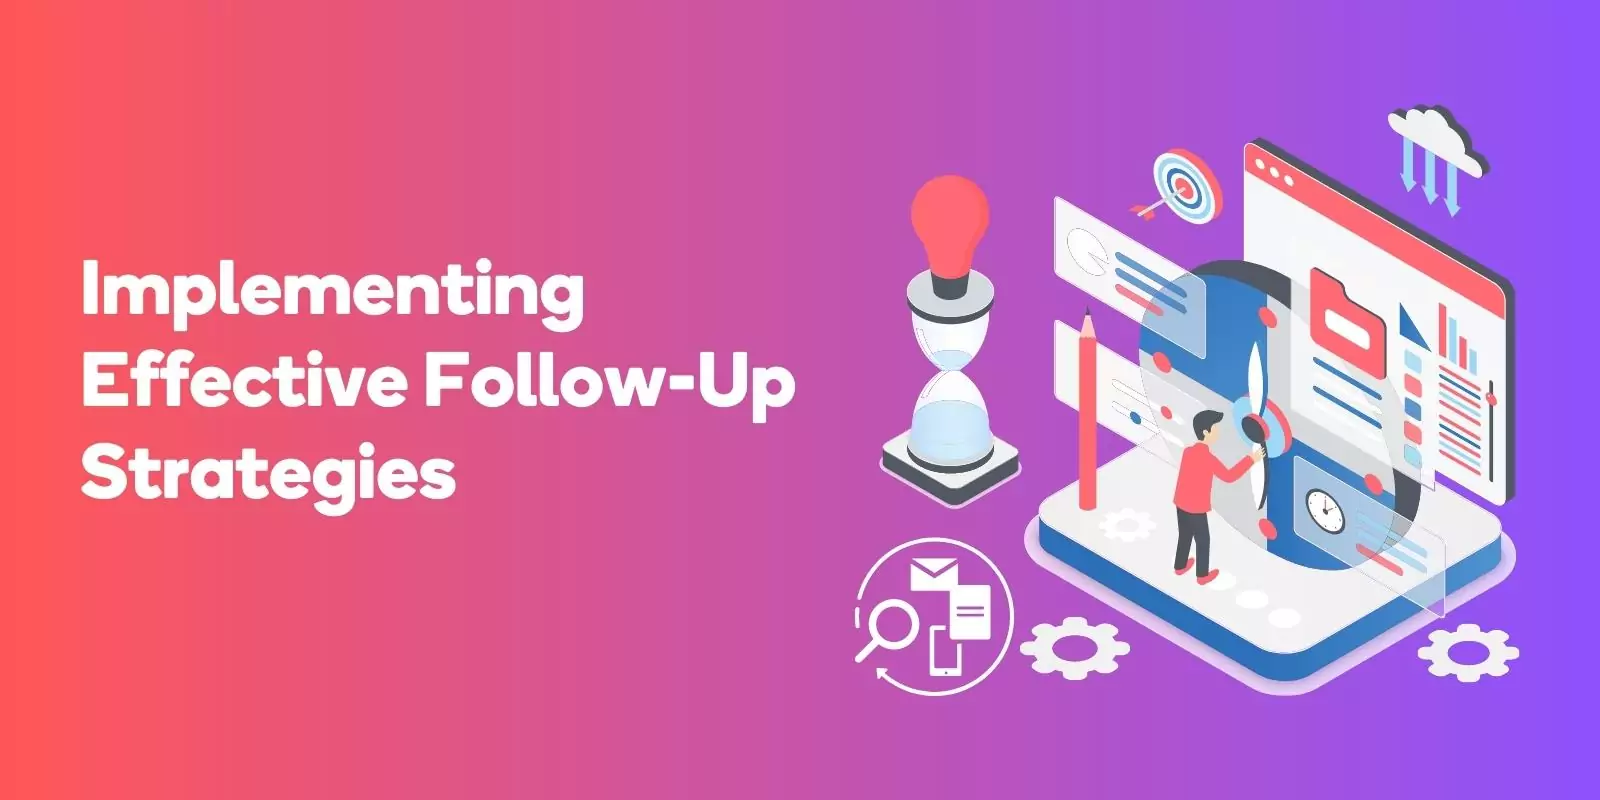 Implementing Effective Follow-Up Strategies